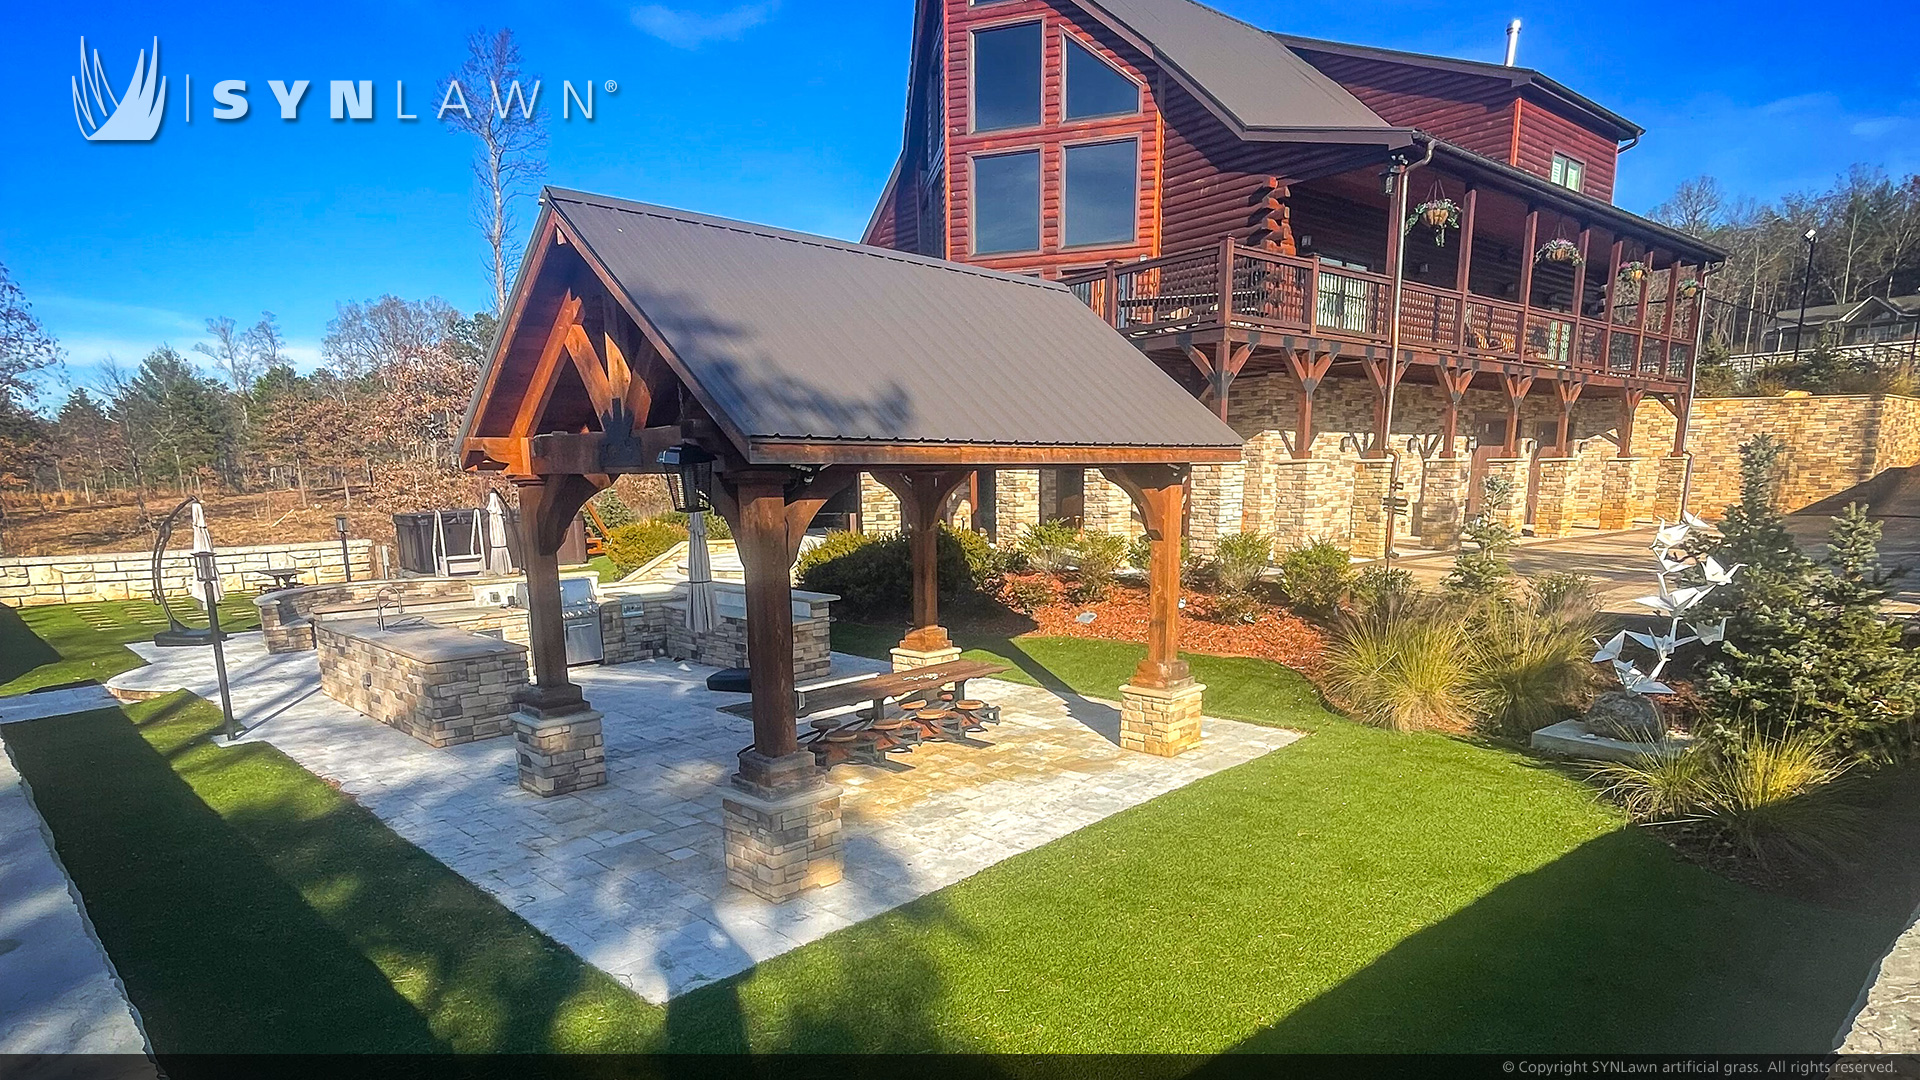 Luxurious Vacation Home Features Recreational Surfacing by SYNLawn